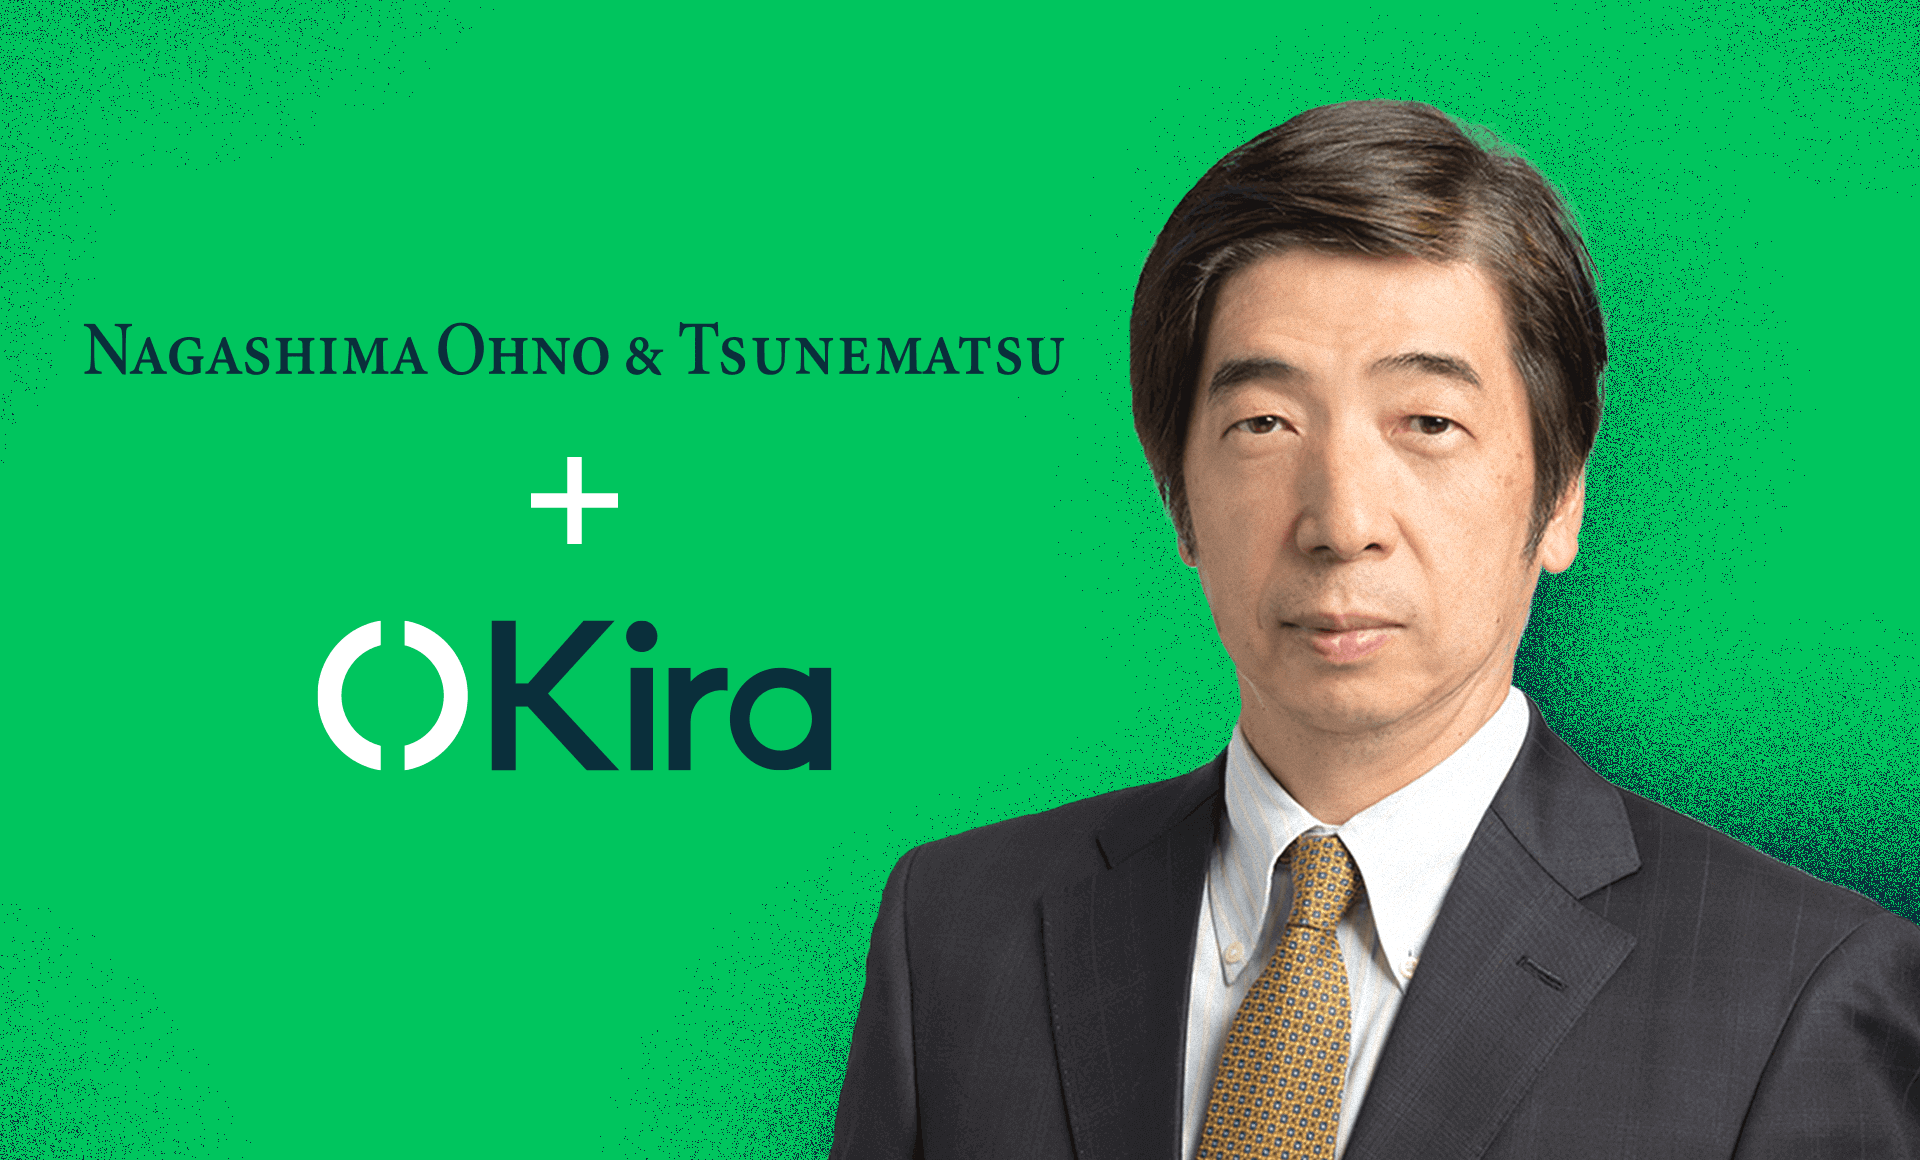 Read the announcement: Nagashima Ohno & Tsunematsu is the First Law Firm in Japan to Adopt Kira Across its Mergers and Acquisitions Practice 